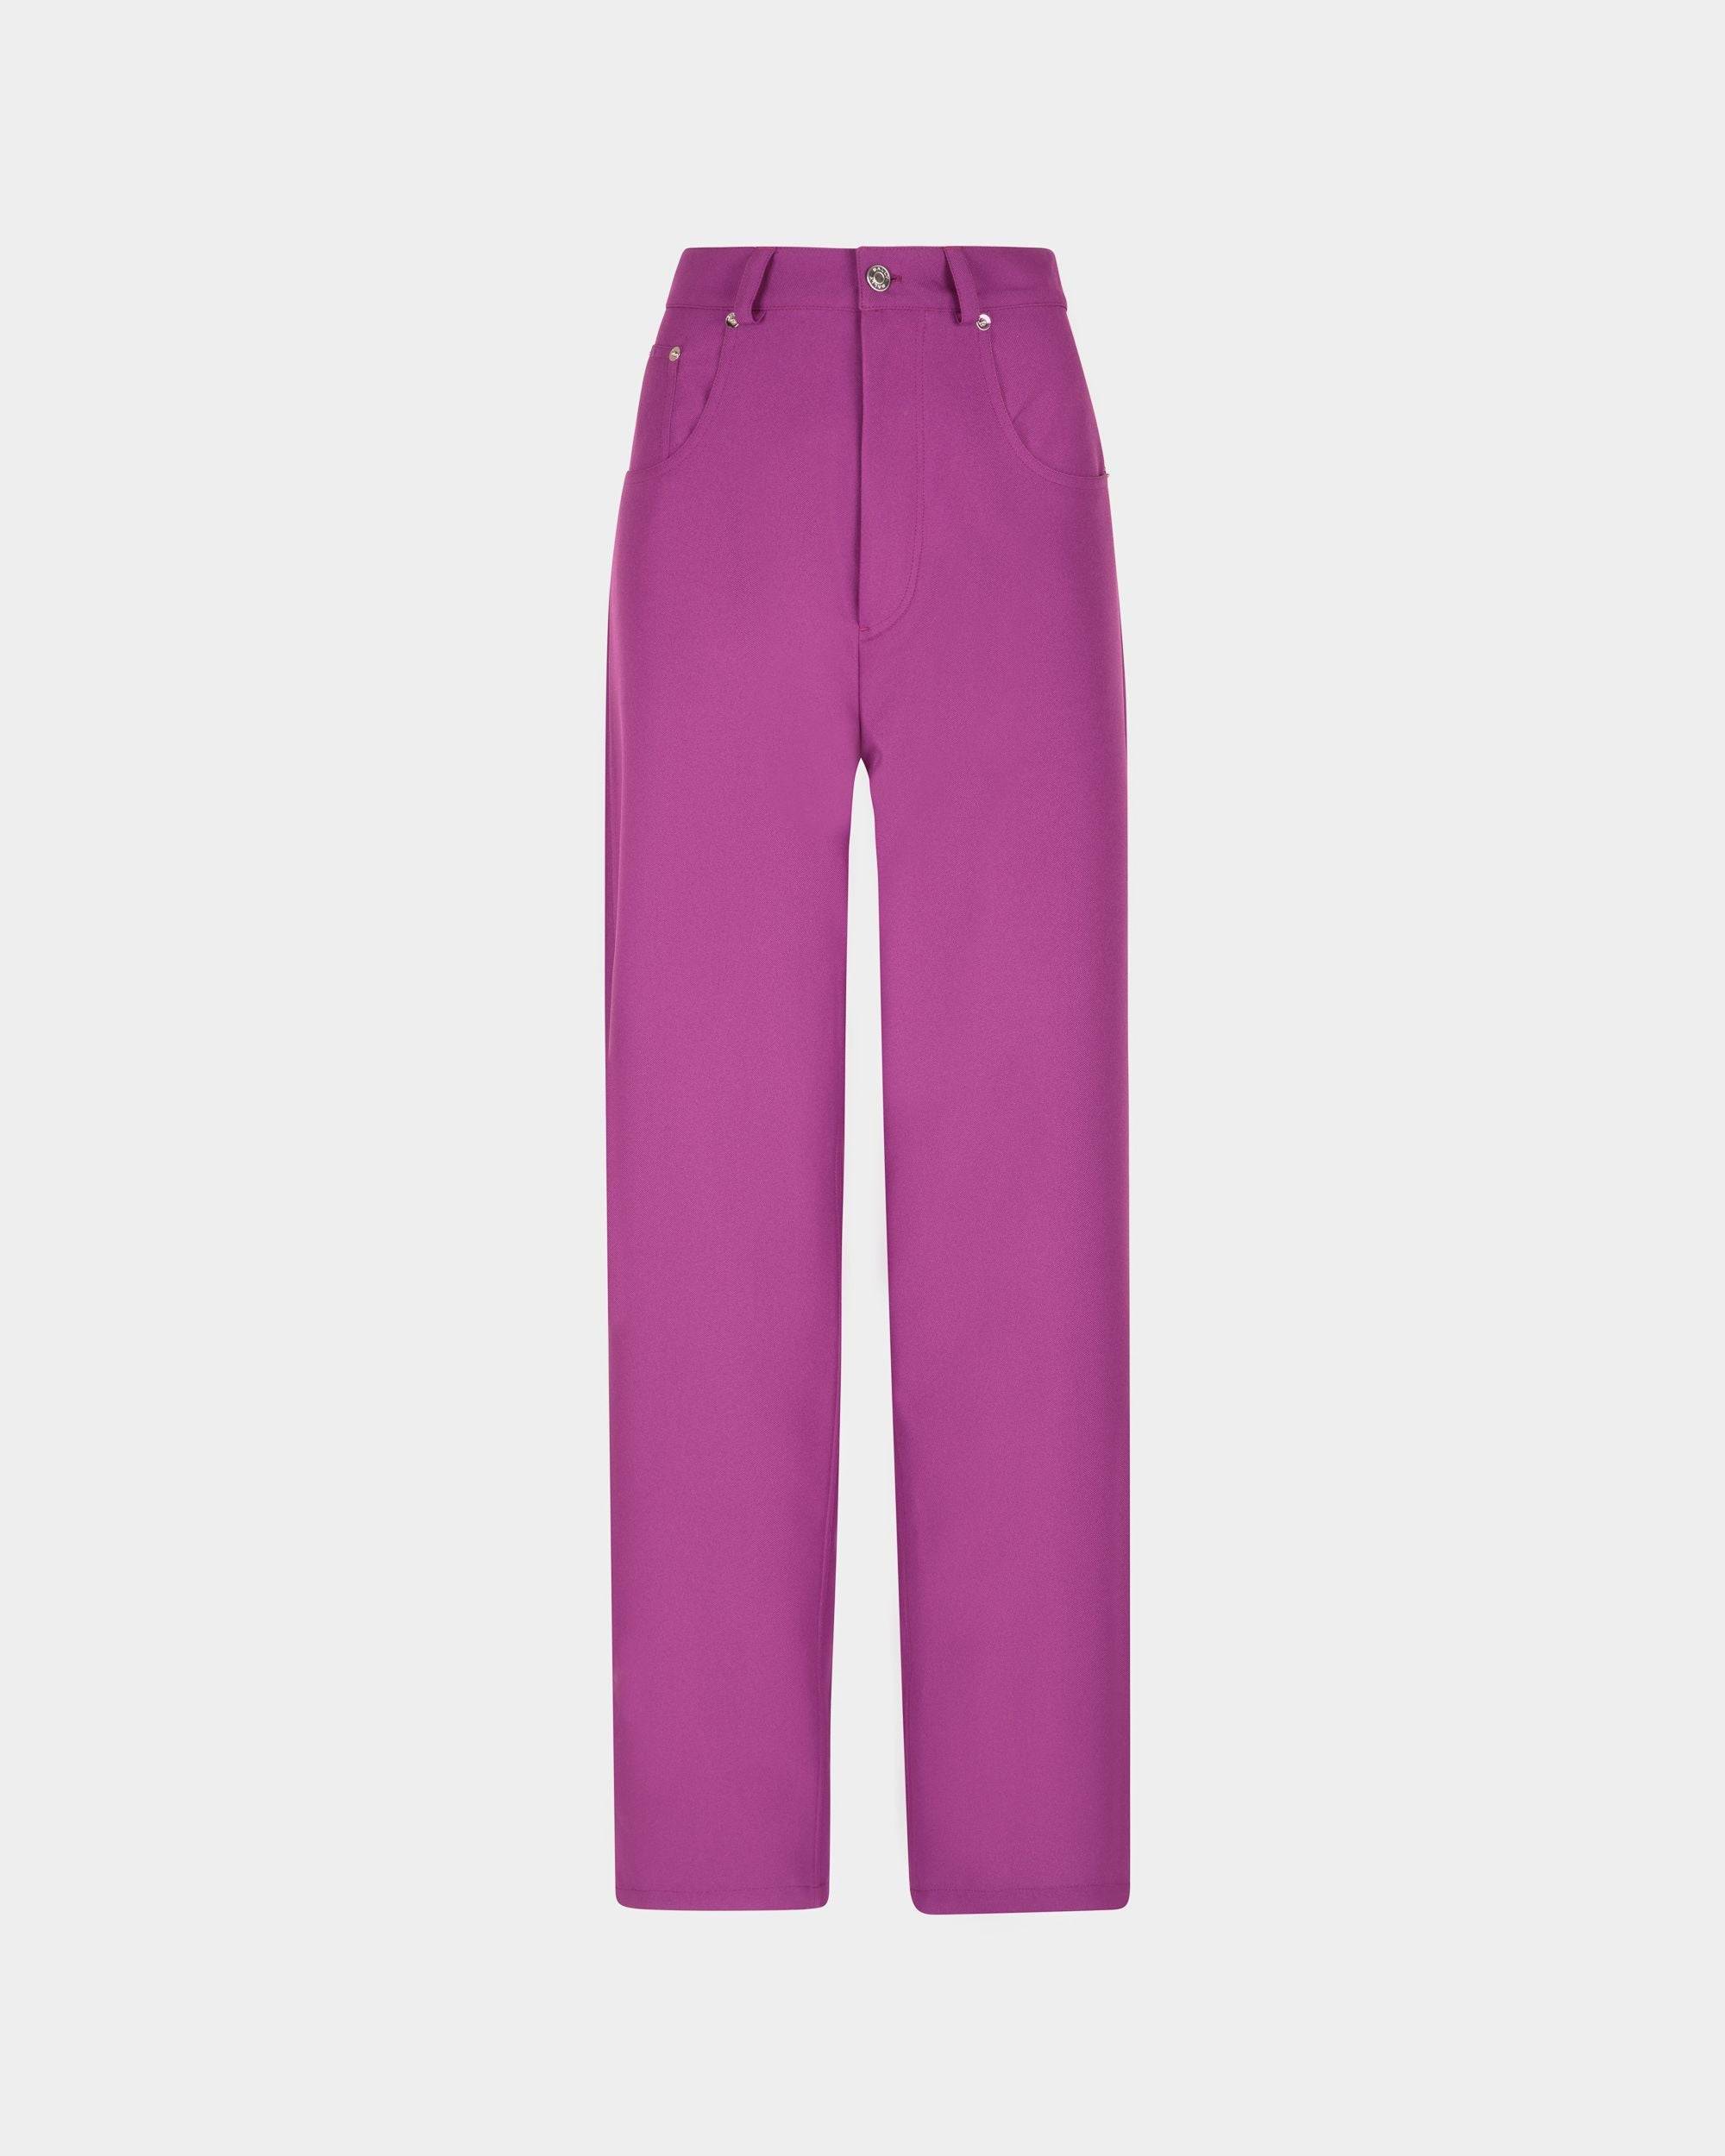 Women's High Waisted Pants In Pink | Bally | Still Life Front